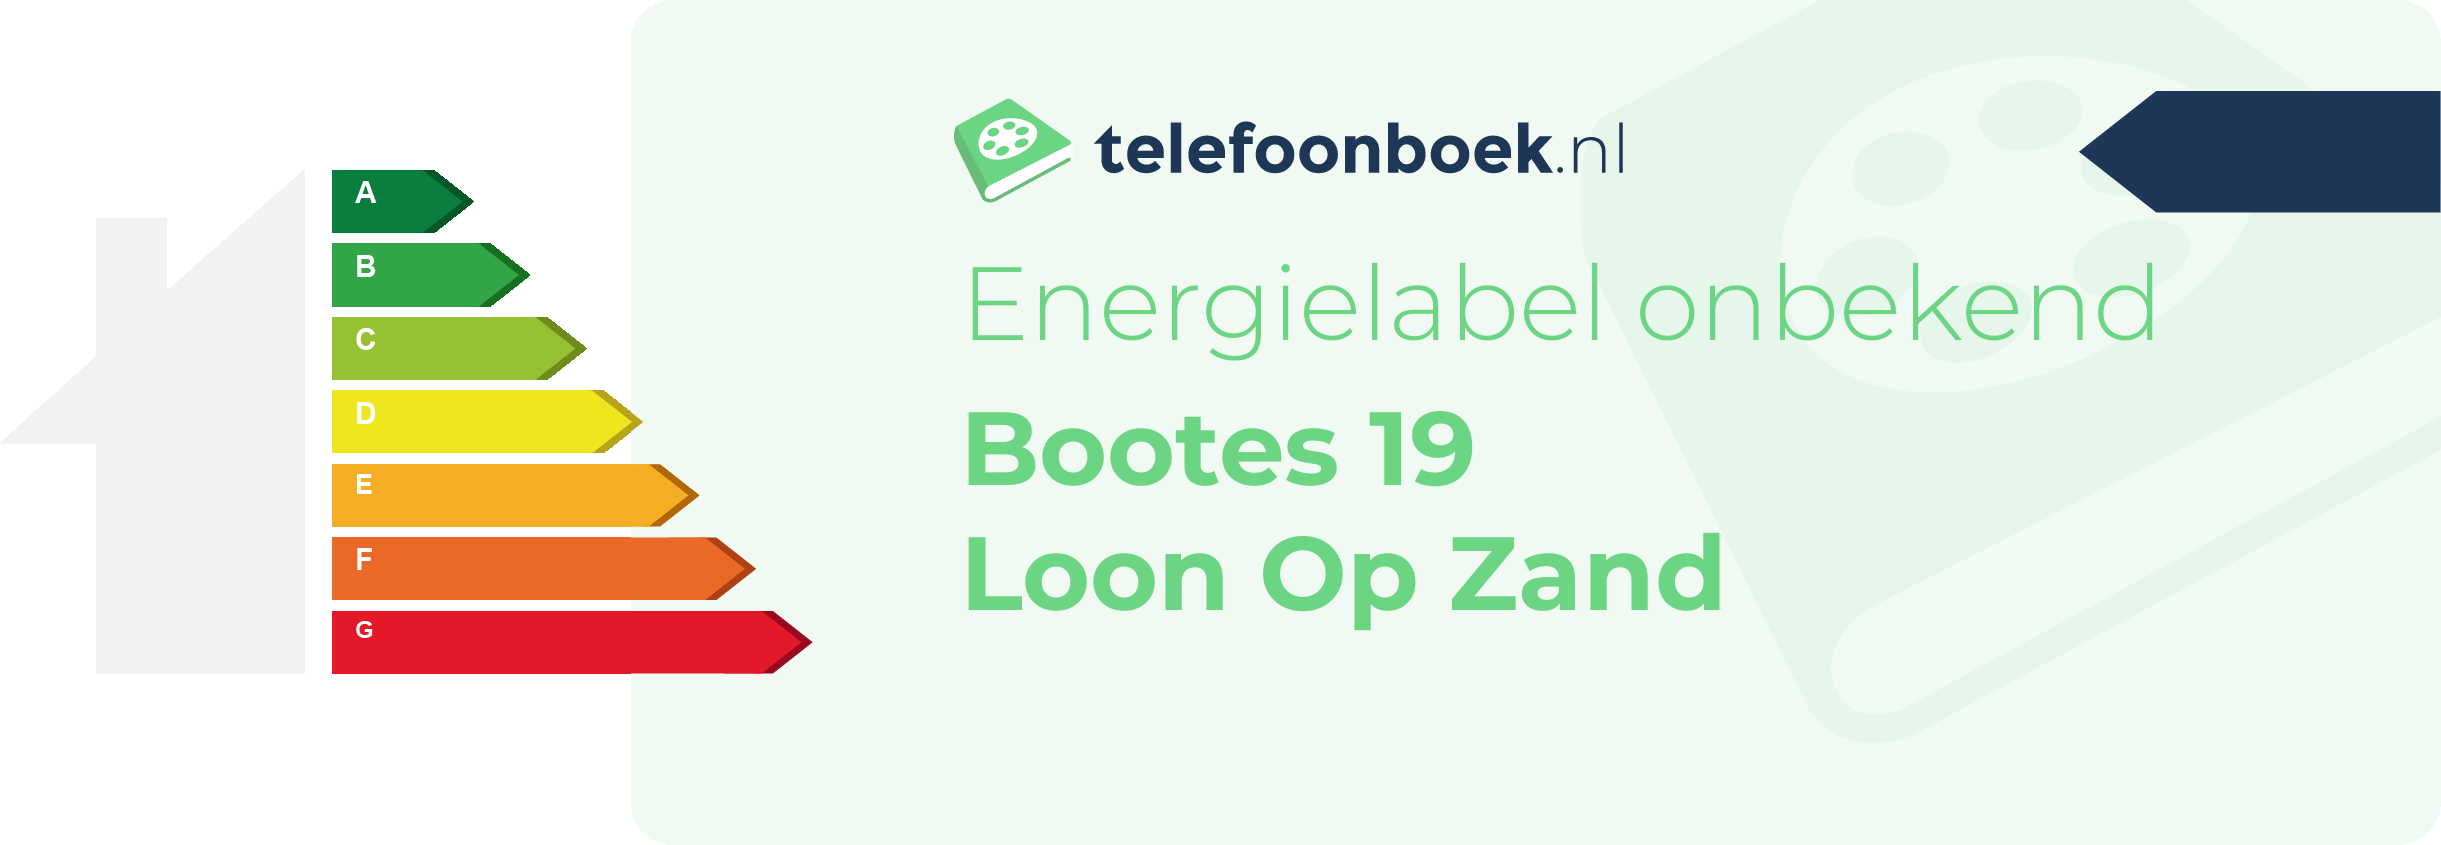 Energielabel Bootes 19 Loon Op Zand